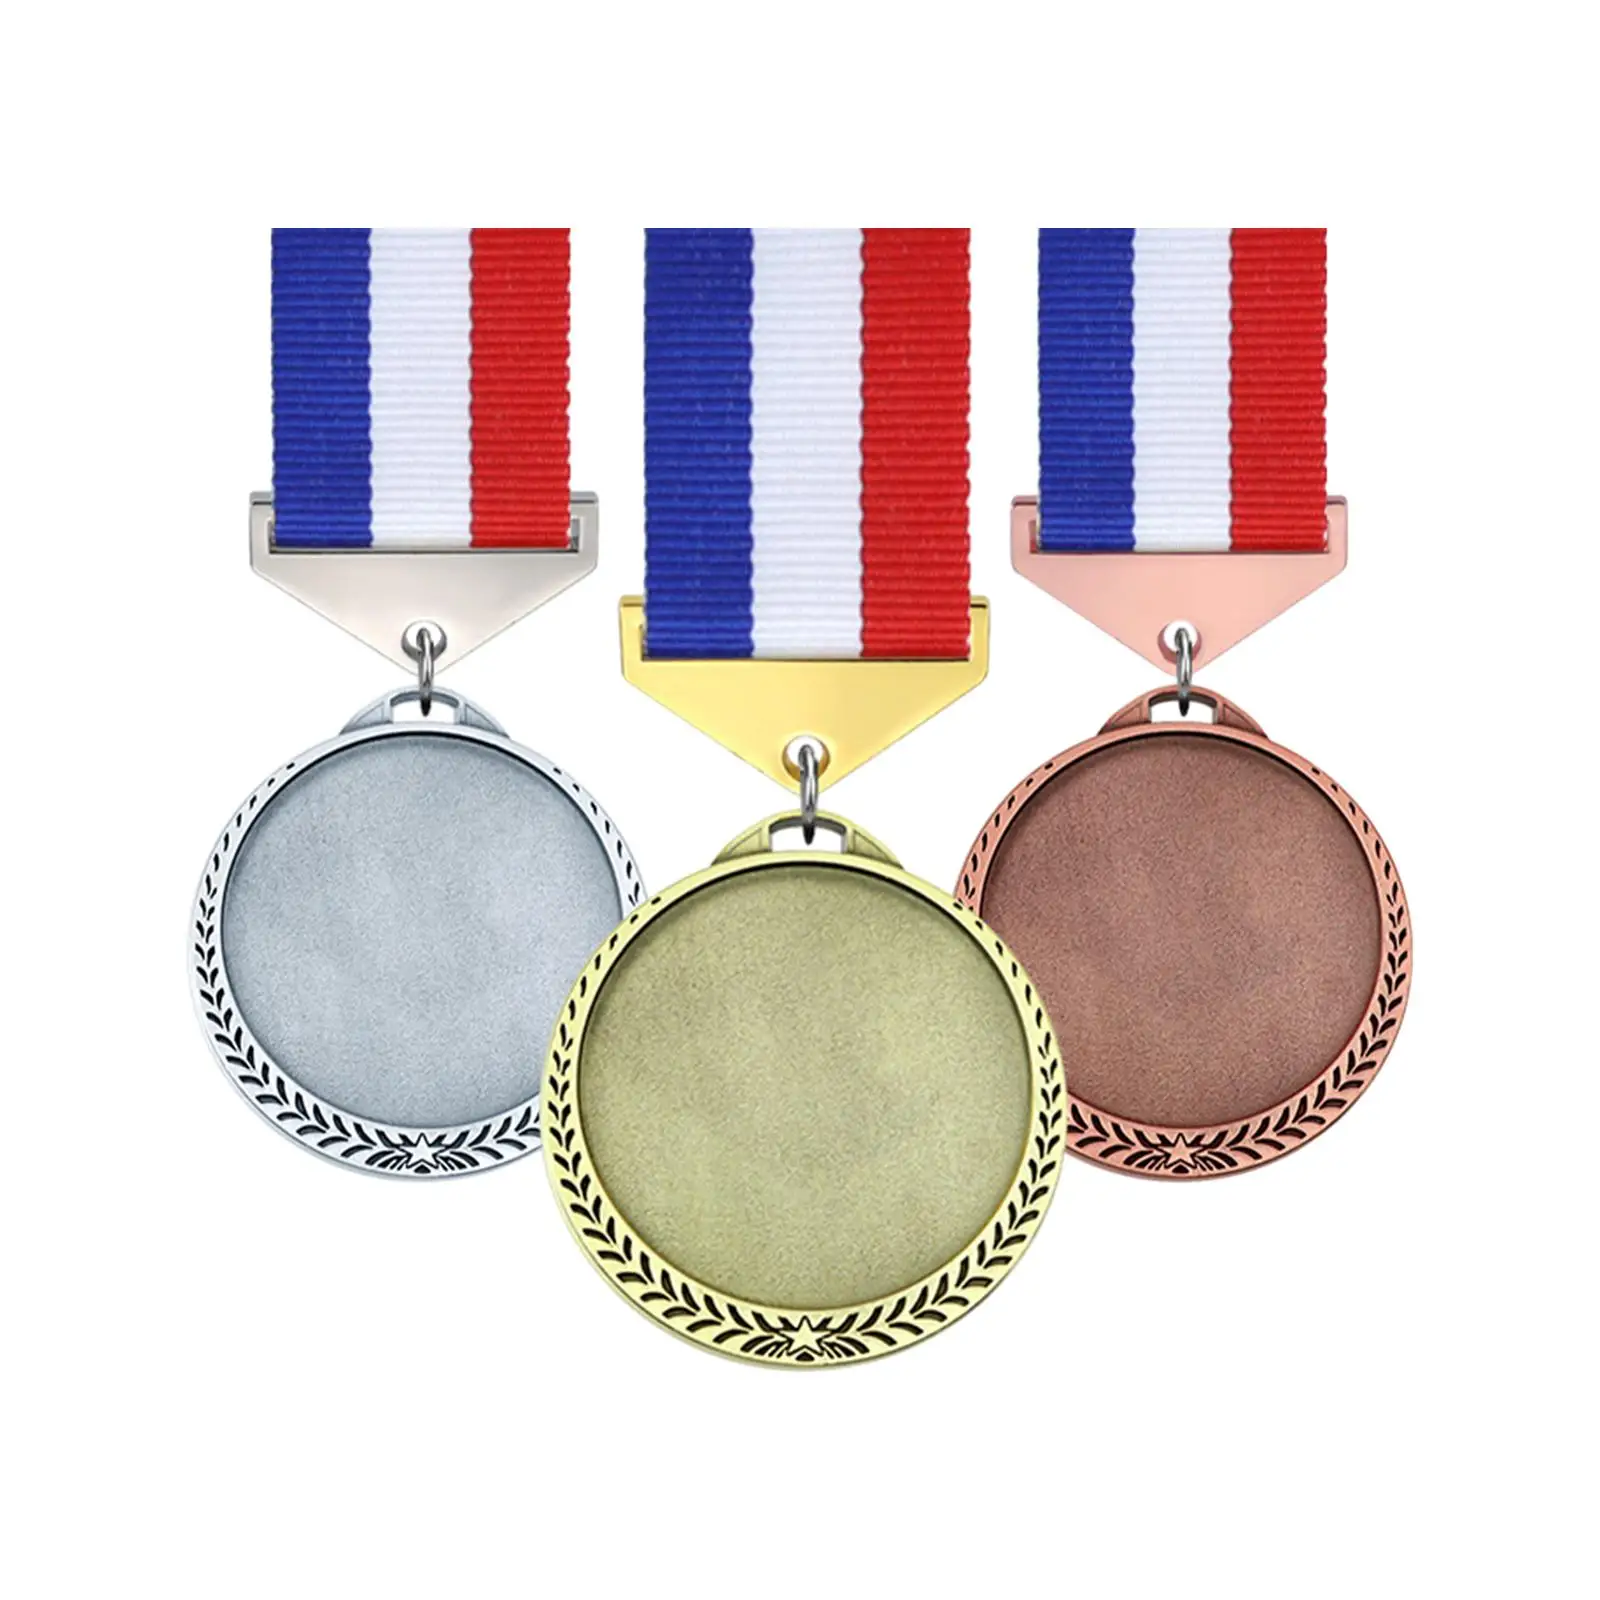 3Pcs Blank Medals Zinc Alloy Prize Gift with Ribbons Award Medals for Spelling Bees Events School Sports Baseball Softball